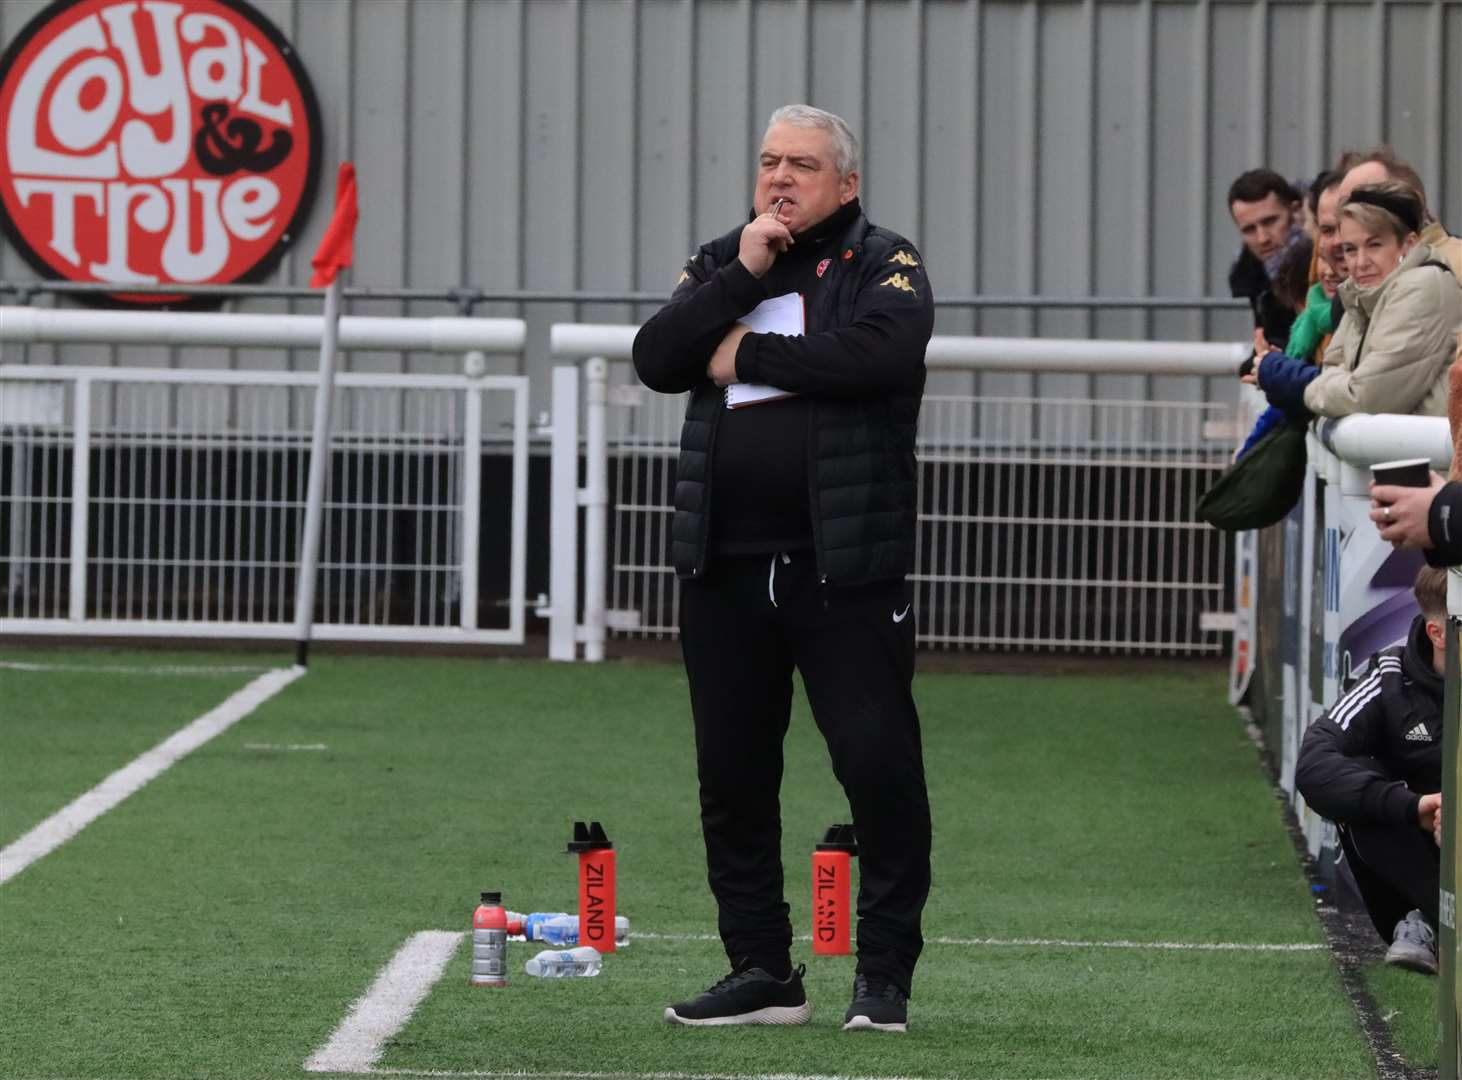 Chatham Town Women’s manager Keith Boanas takes his side to Billericay tonight for a must-win game Picture: Allen Hollands